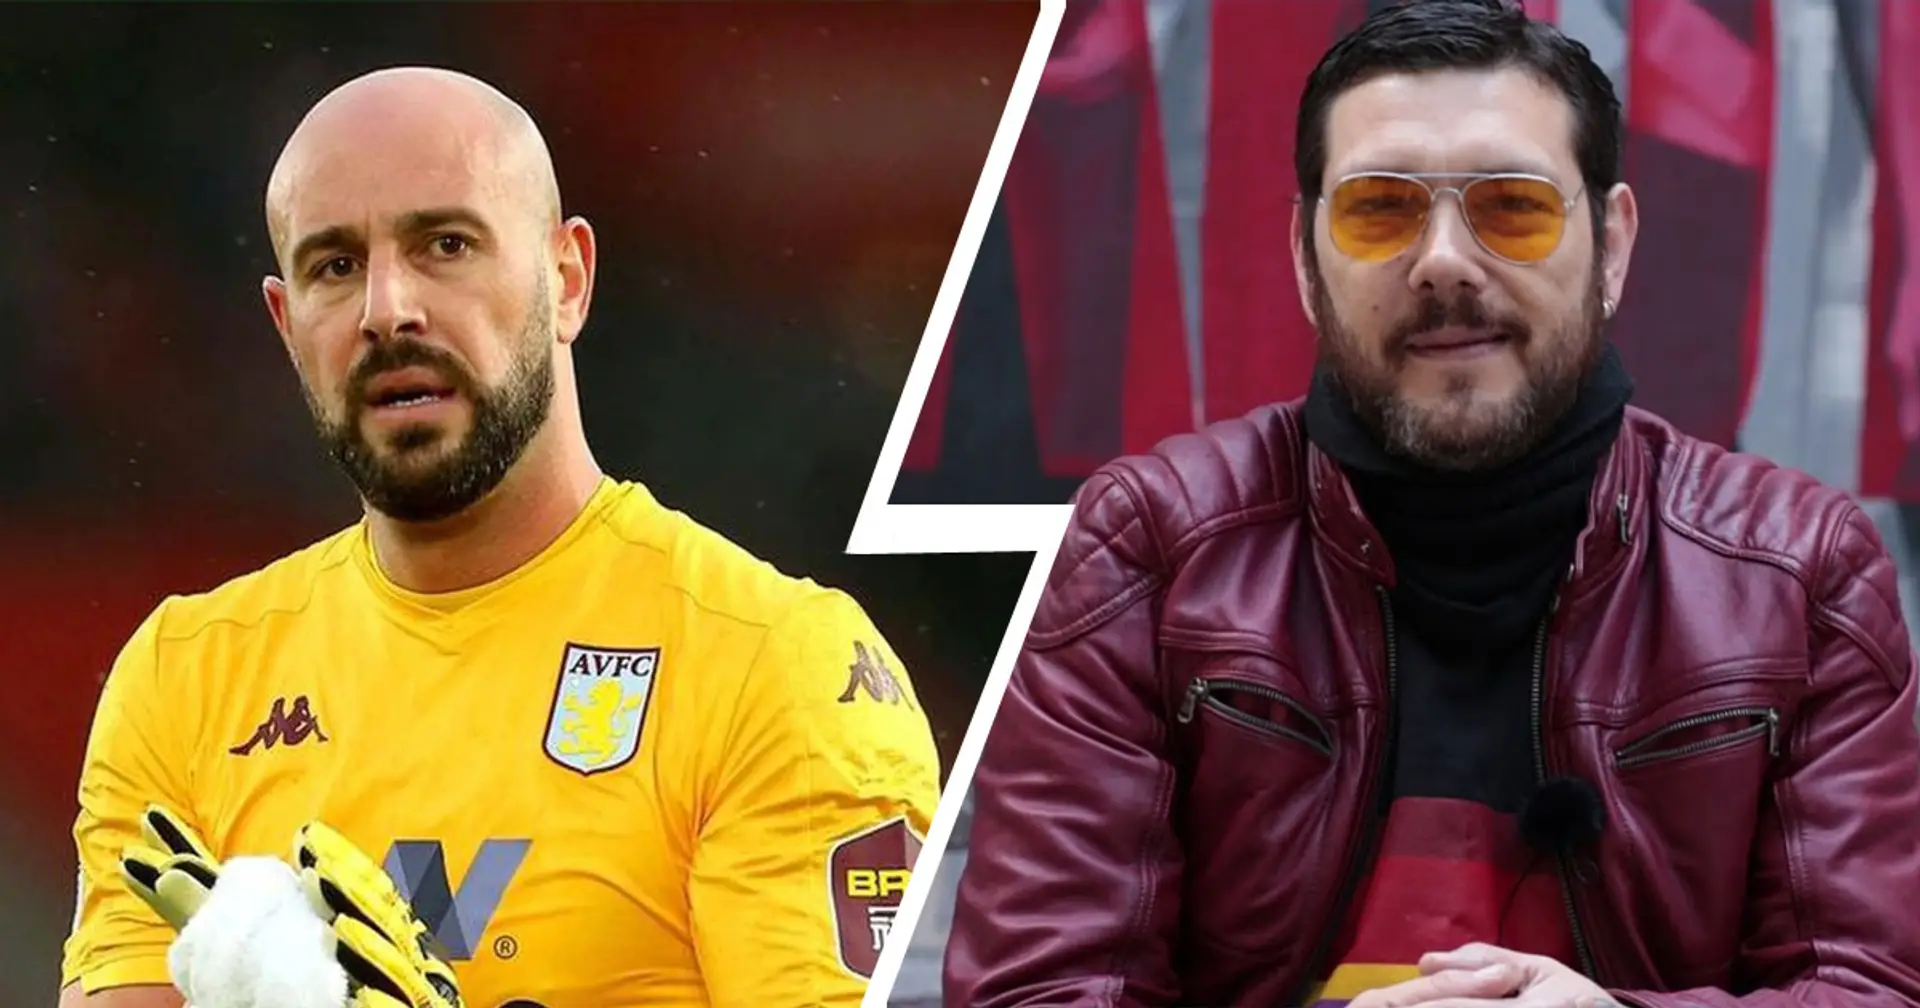 Pepe Reina supports street protests in Madrid, gets branded 'a******e fascist s***' by Spanish rapper